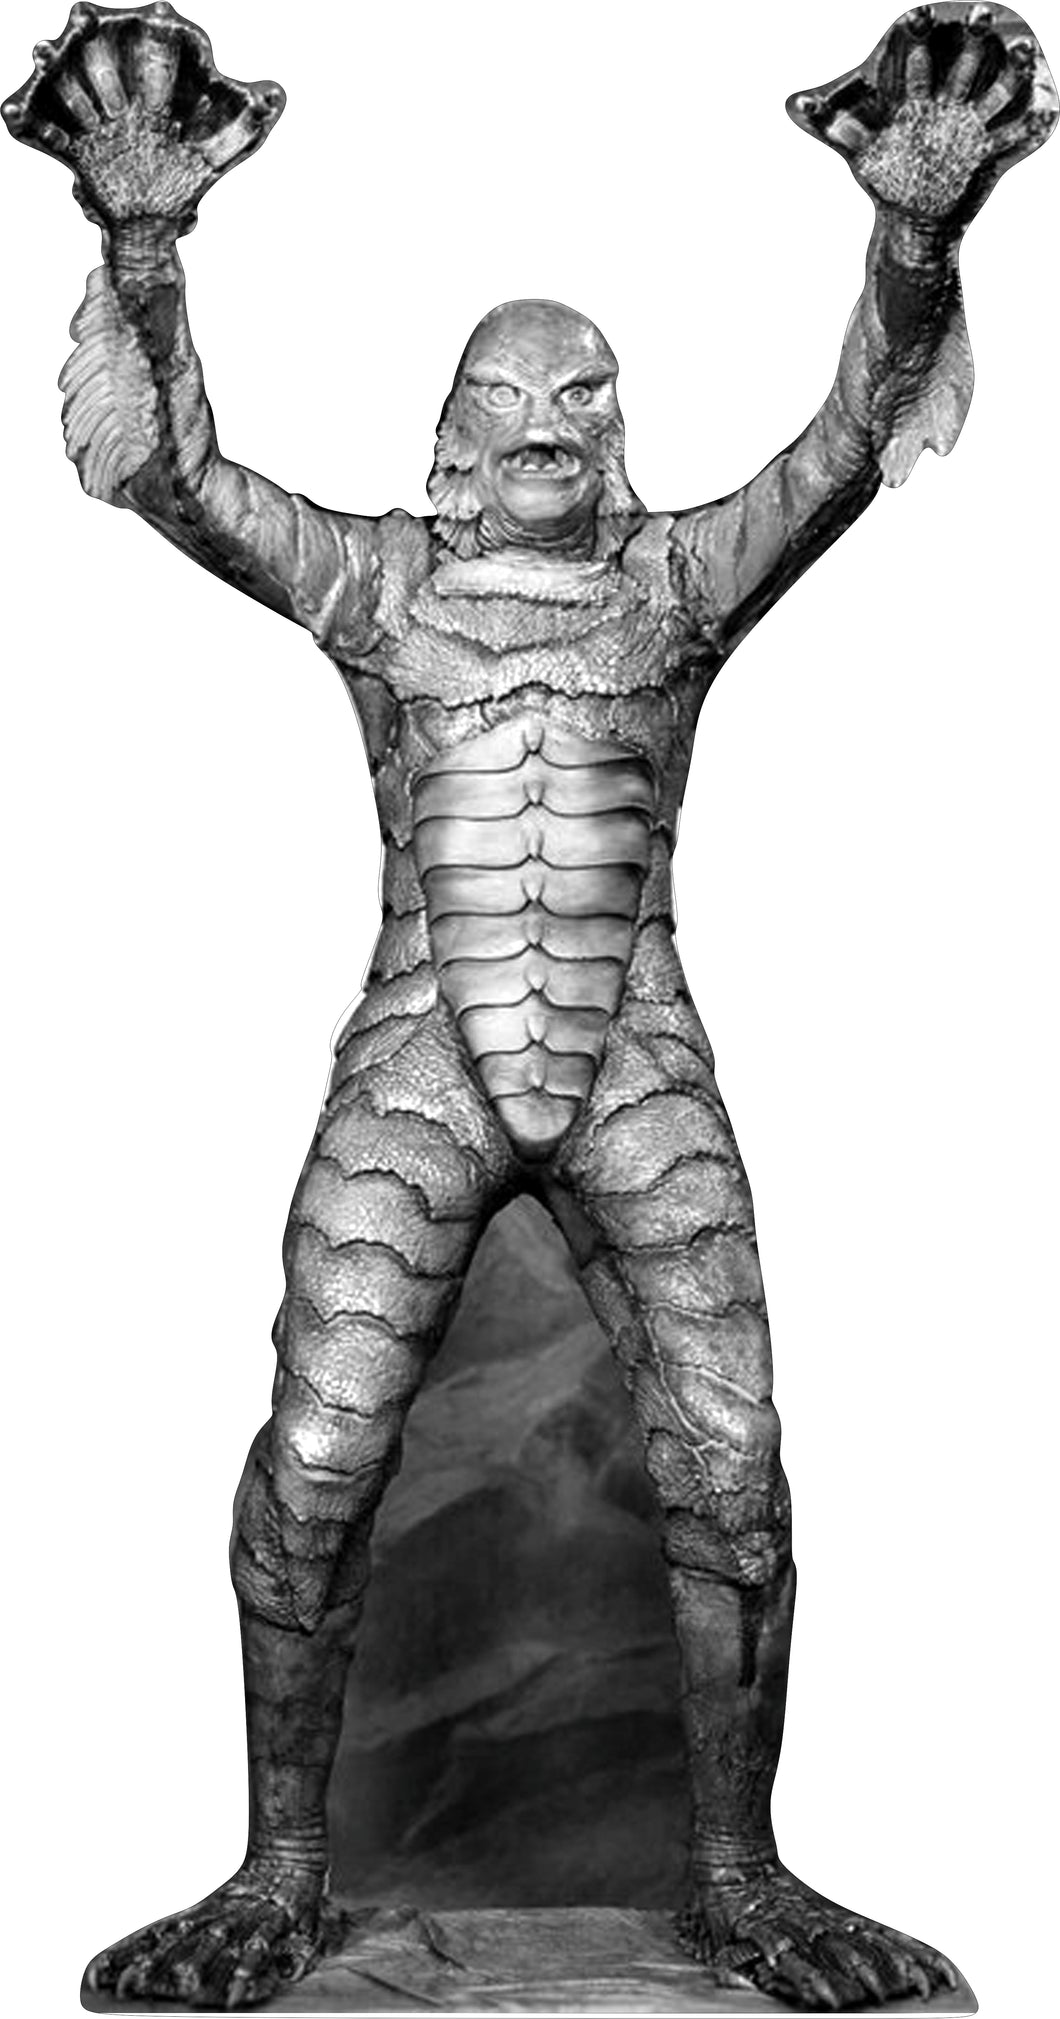 THE CREATURE FROM THE BLACK LAGOON - 50's- 85